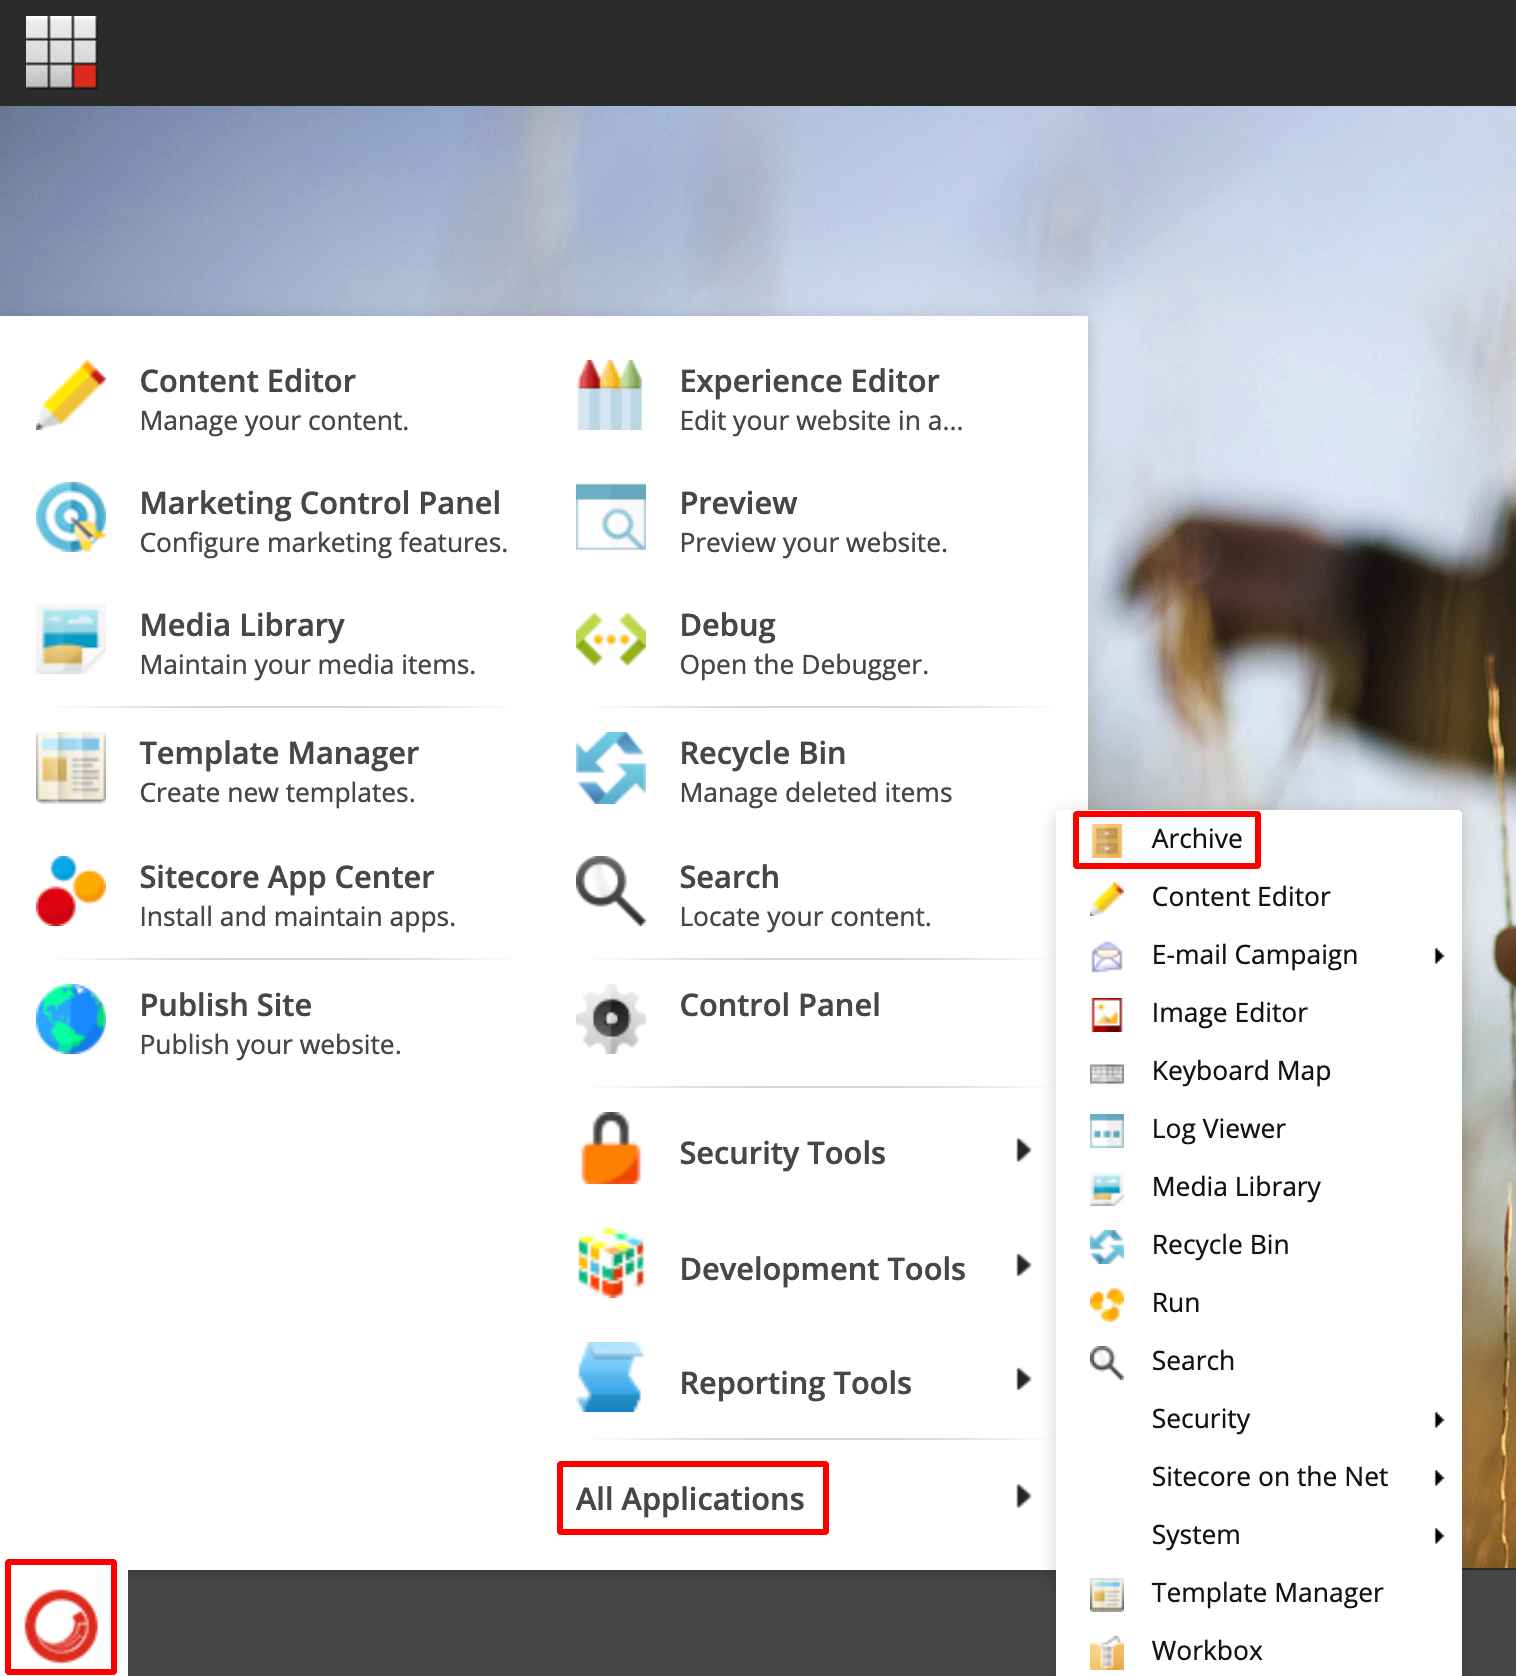 All applications and archive Sitecore master view